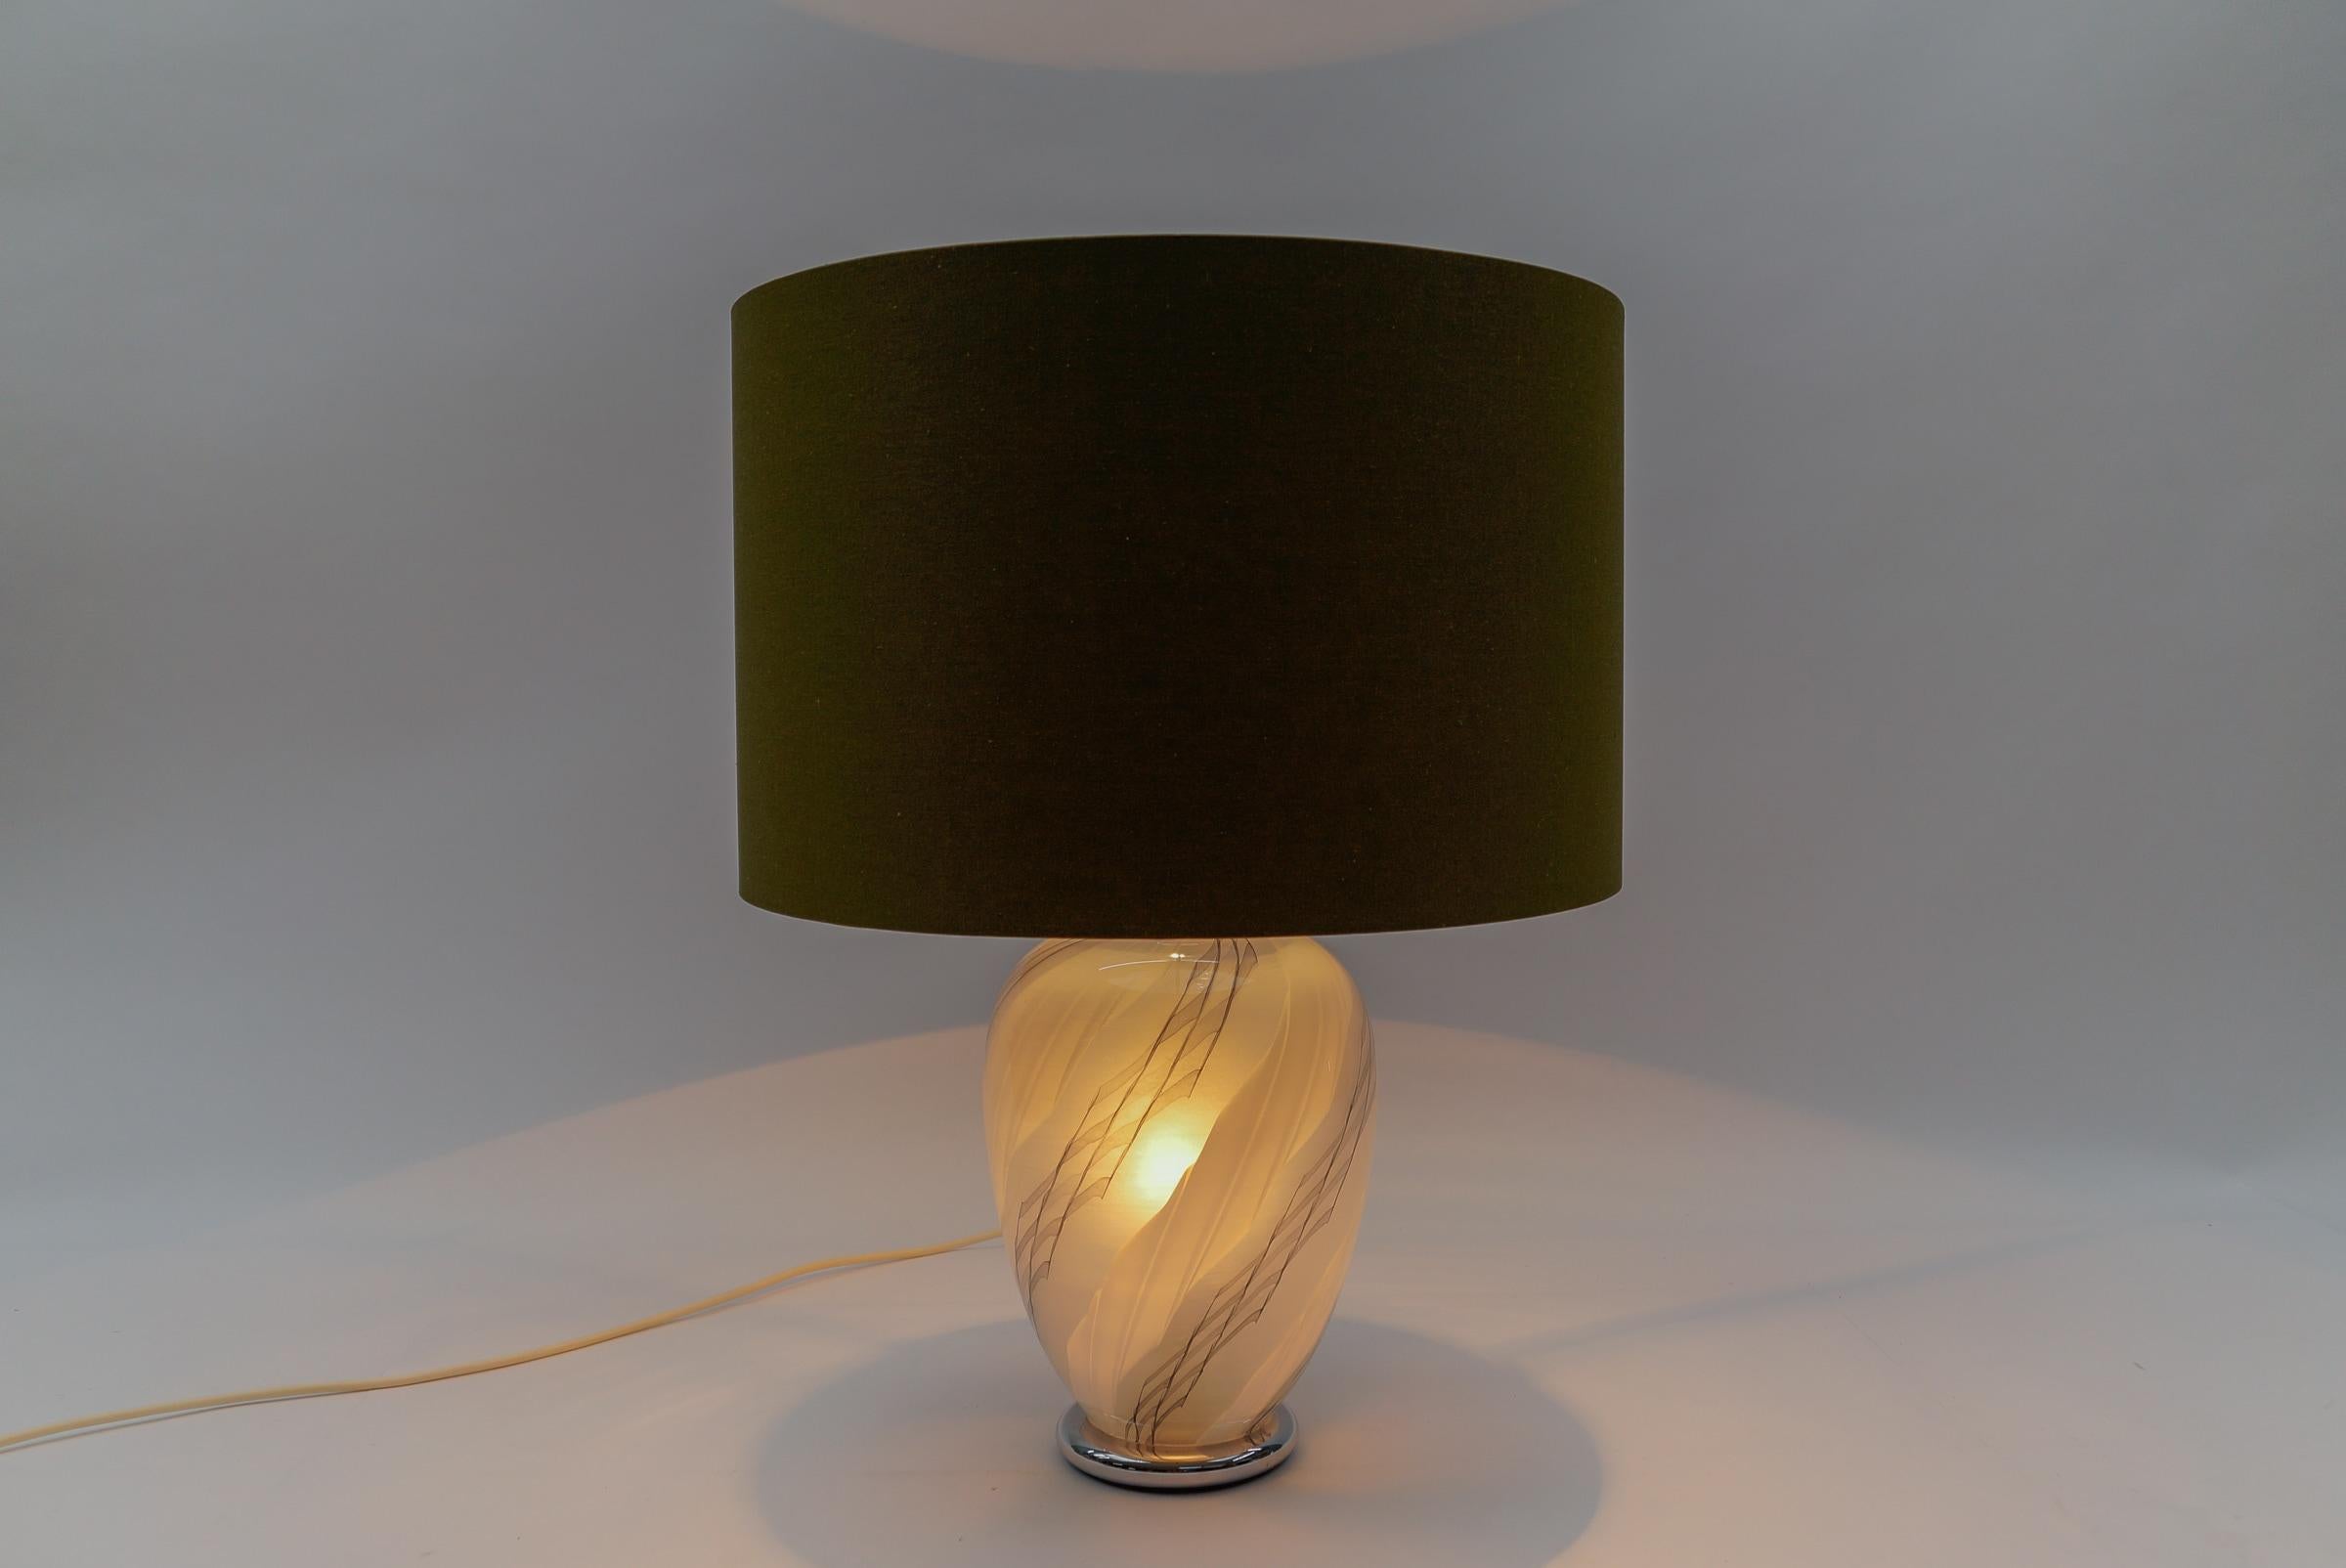 Mid-20th Century Mid Century Modern Chrome & Illuminated Glass Table Lamp Base, 1960s Germany For Sale